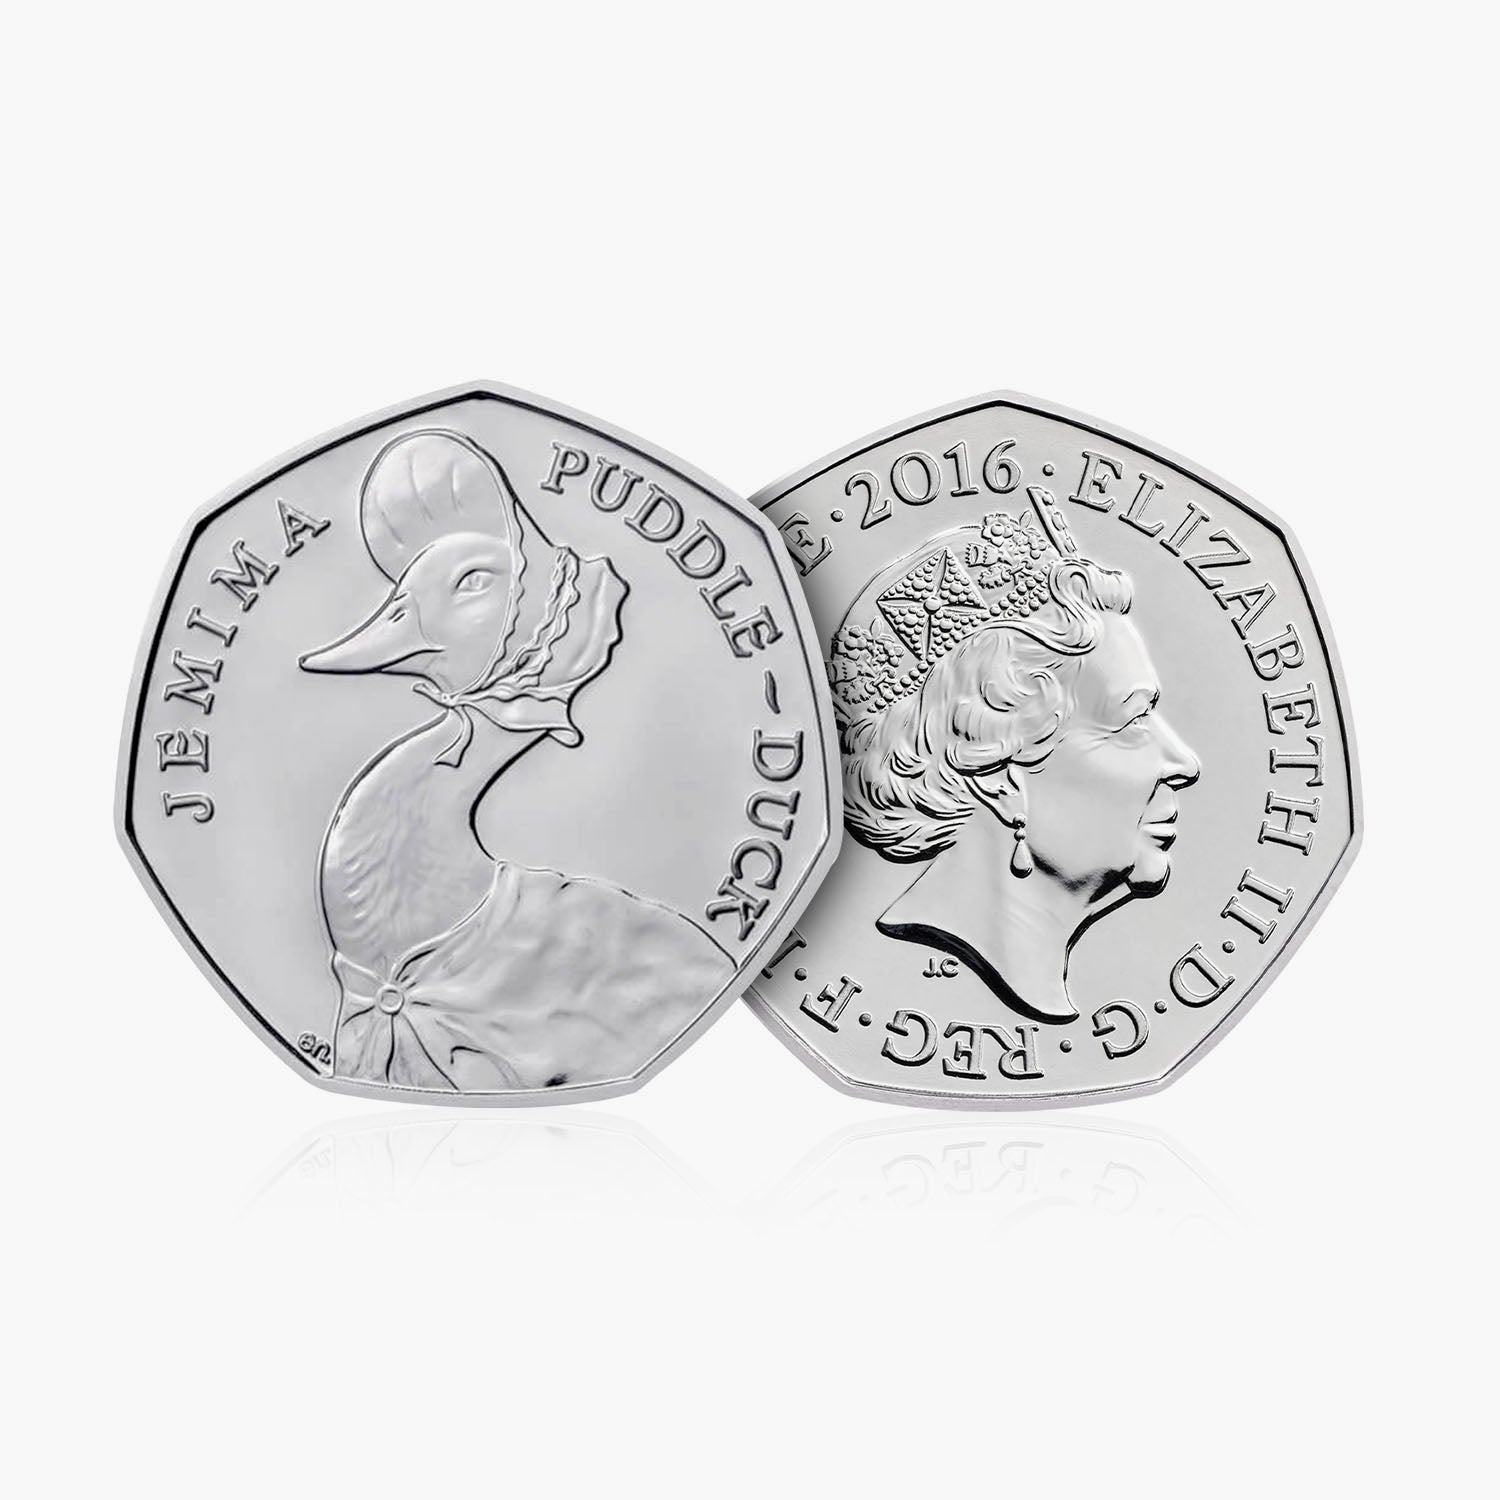 2016 Circulated Beatrix Potter series - Jemima Puddle-Duck 50p Coin